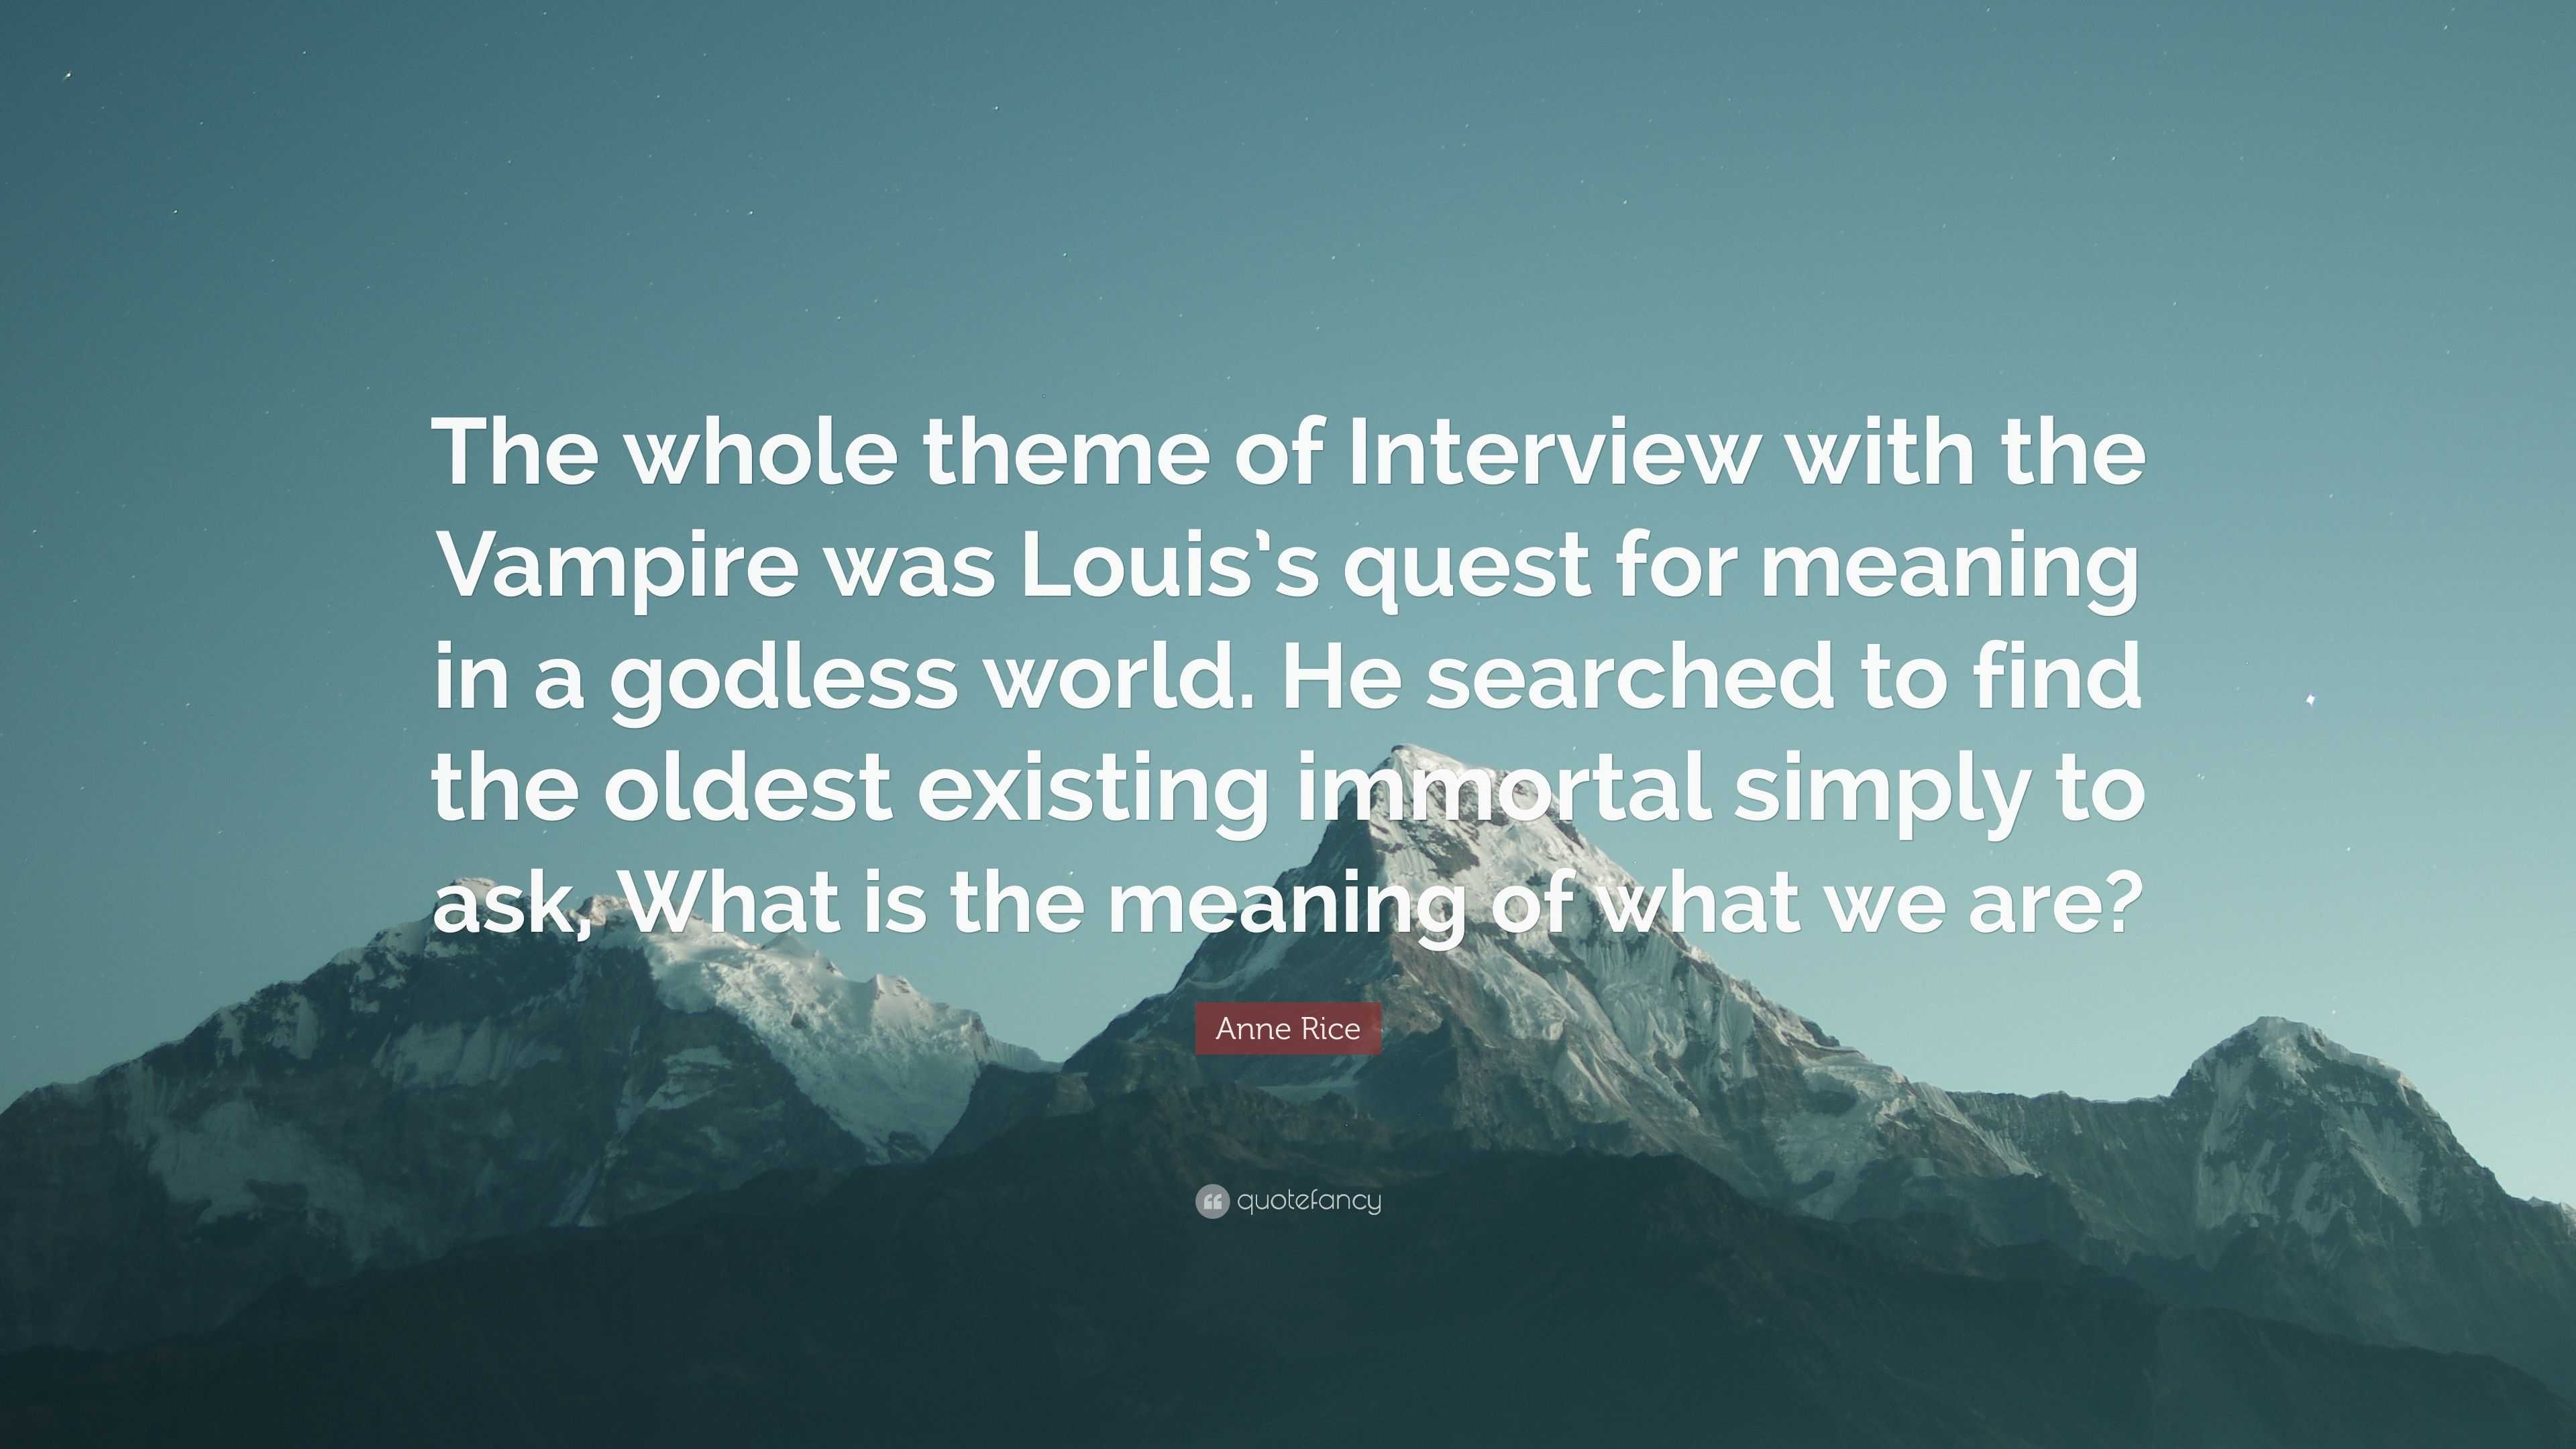 Anne Rice Quote: “The Whole Theme Of Interview With The Vampire Was Louis's Quest For Meaning In A Godless World. He Searched To Find The ...”